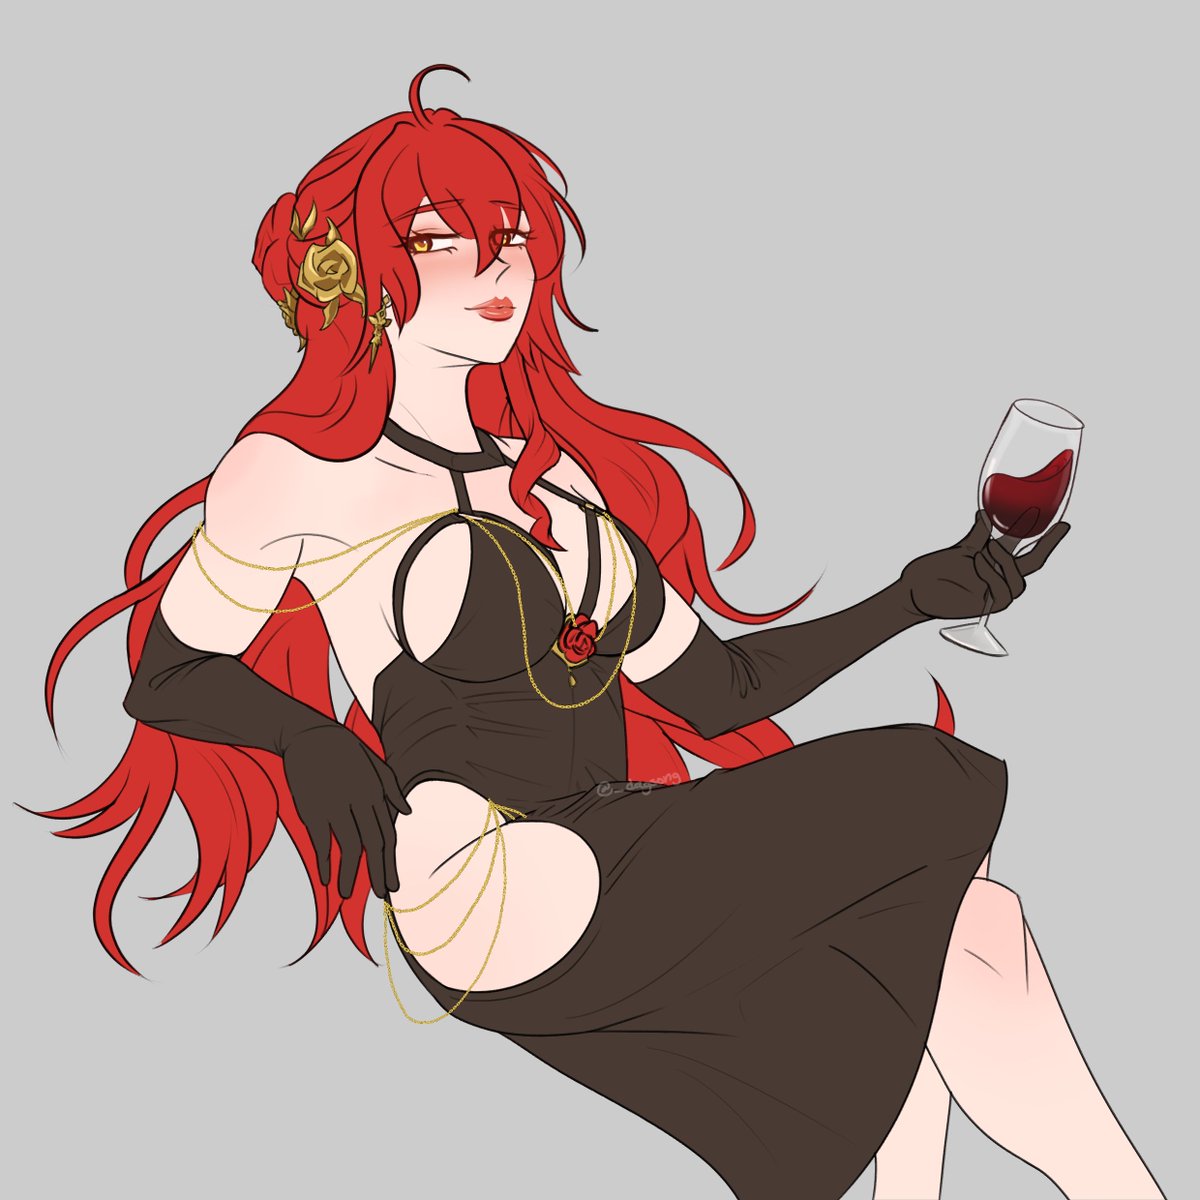 #kafhime bartender AU

i was gonna polish these more but then i realized id probably push it off forever if i waited so here it is anyways